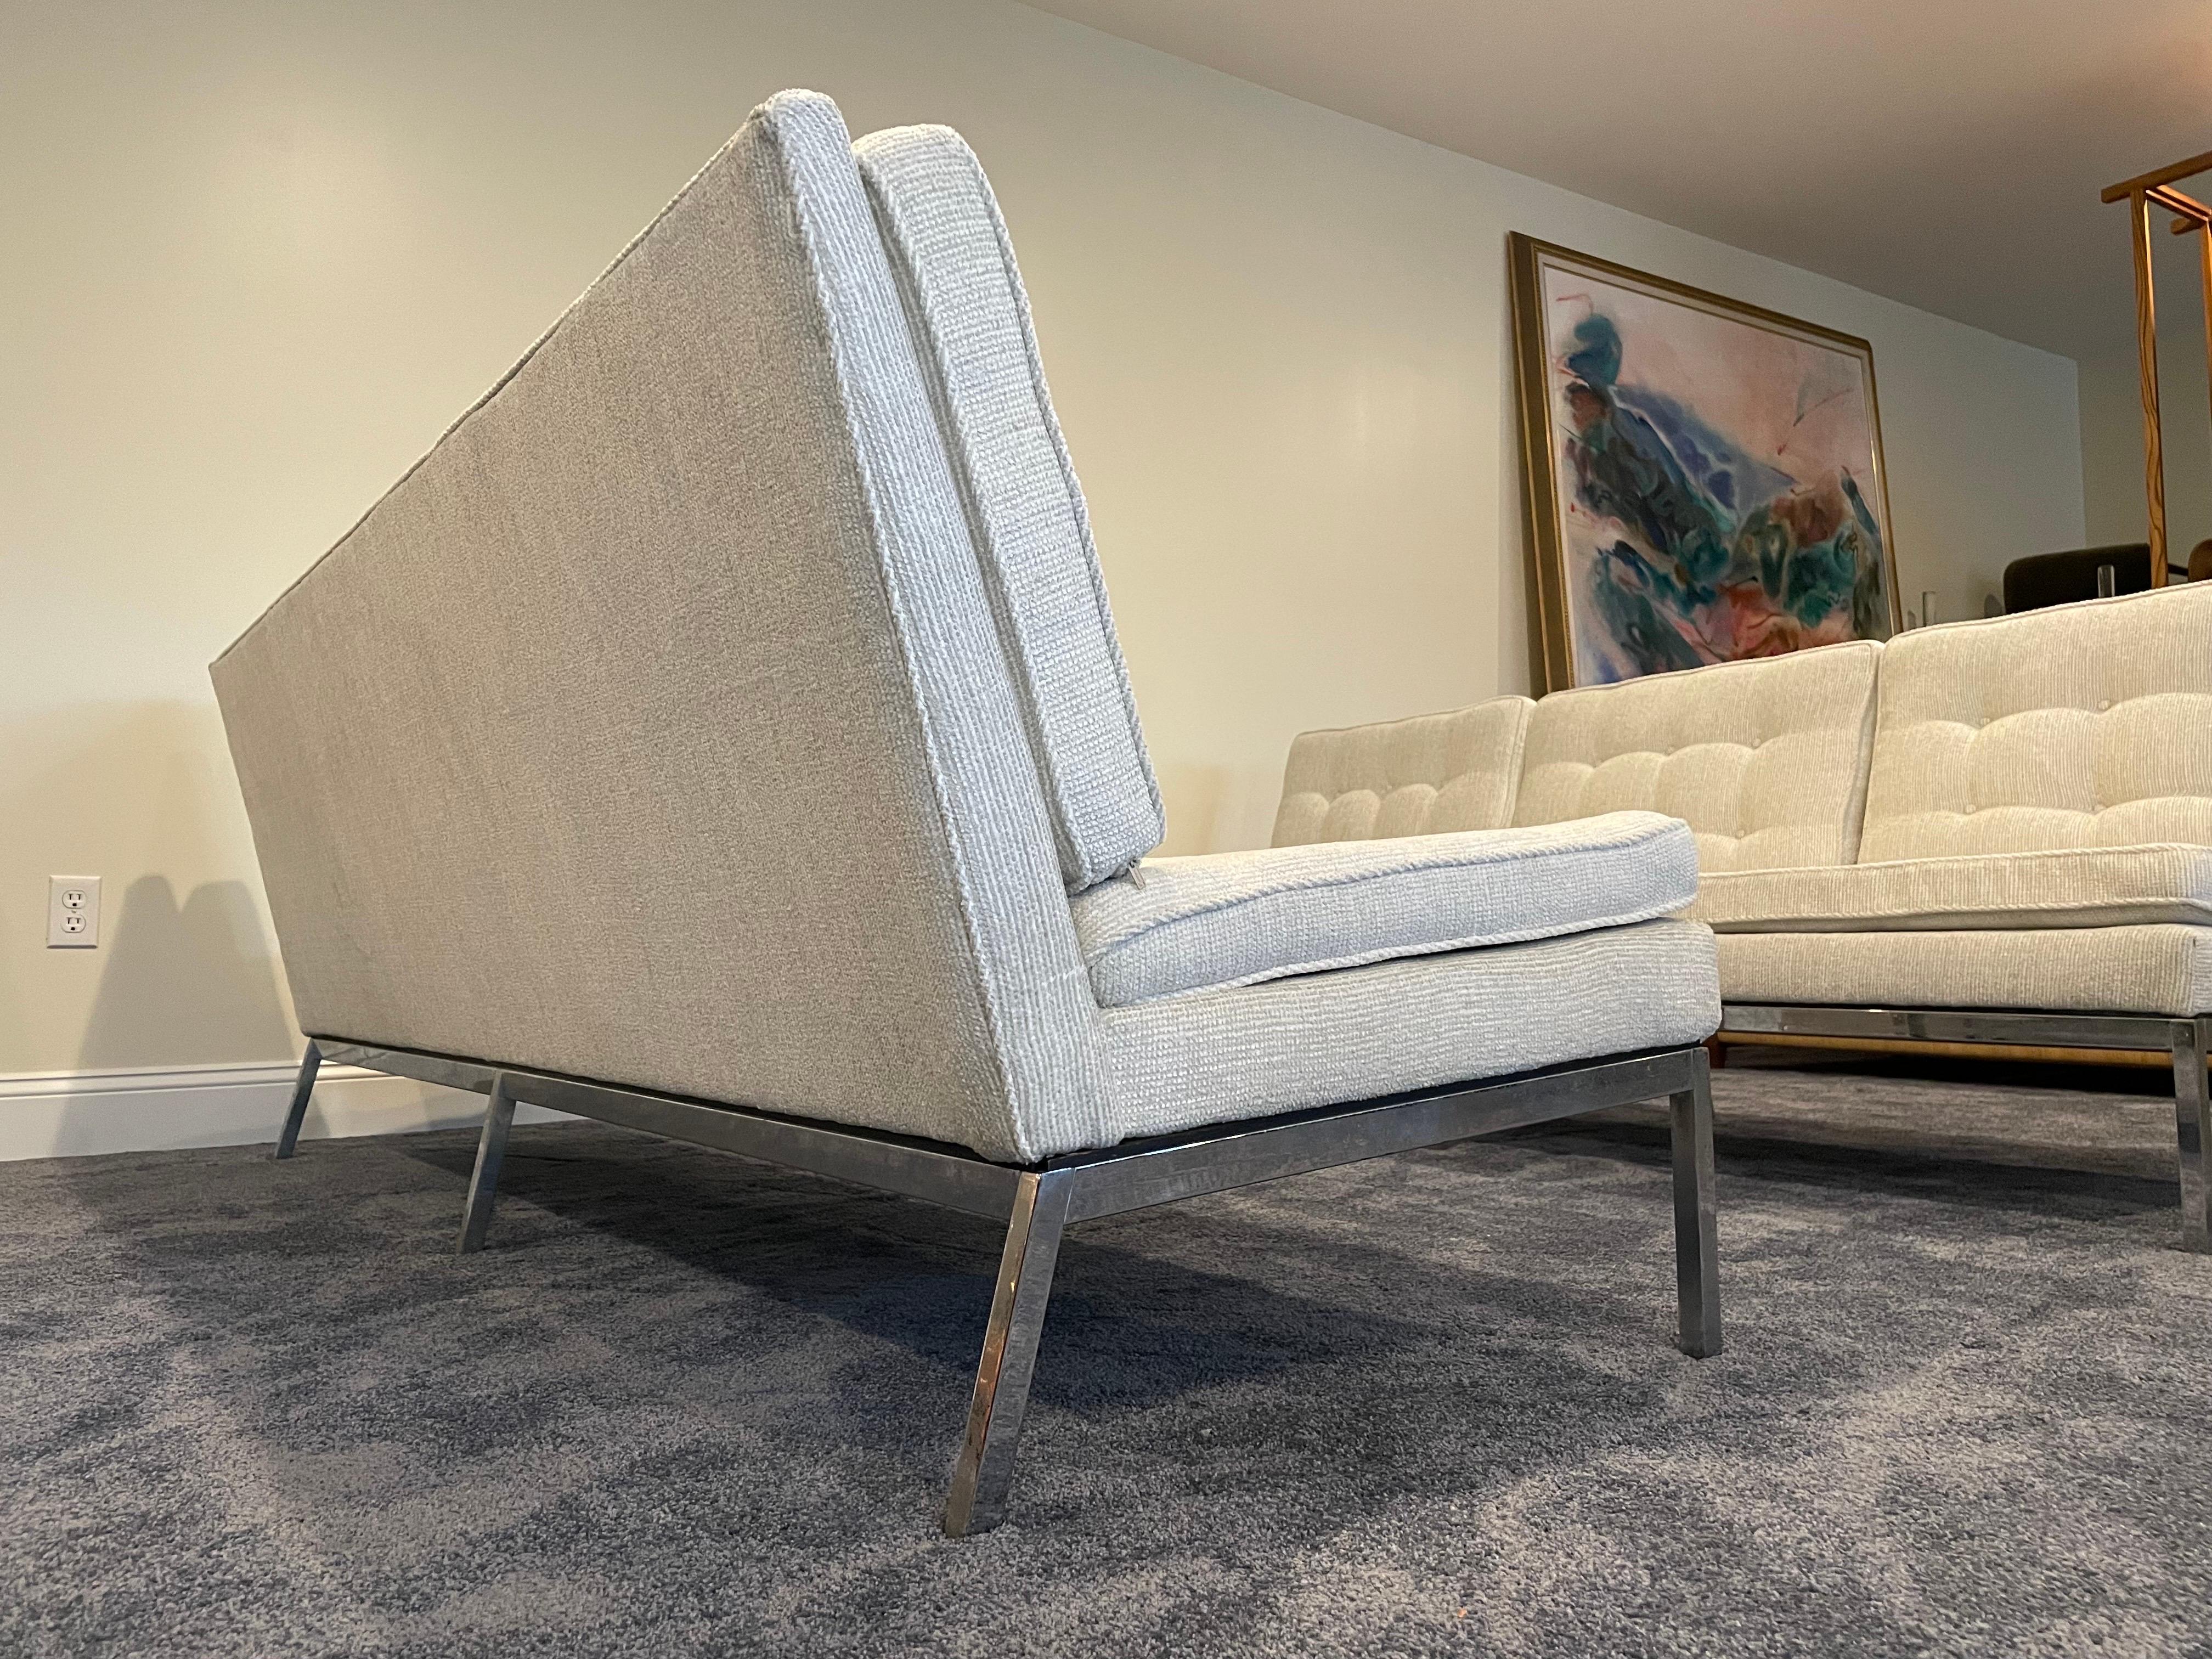 The Florence Knoll armless slipper sofas are a stunning example of mid-century modern design. A classic piece that has stood the test of time, the sofas are a testament to the enduring appeal of Knoll's work. The chrome base adds a sleek and modern